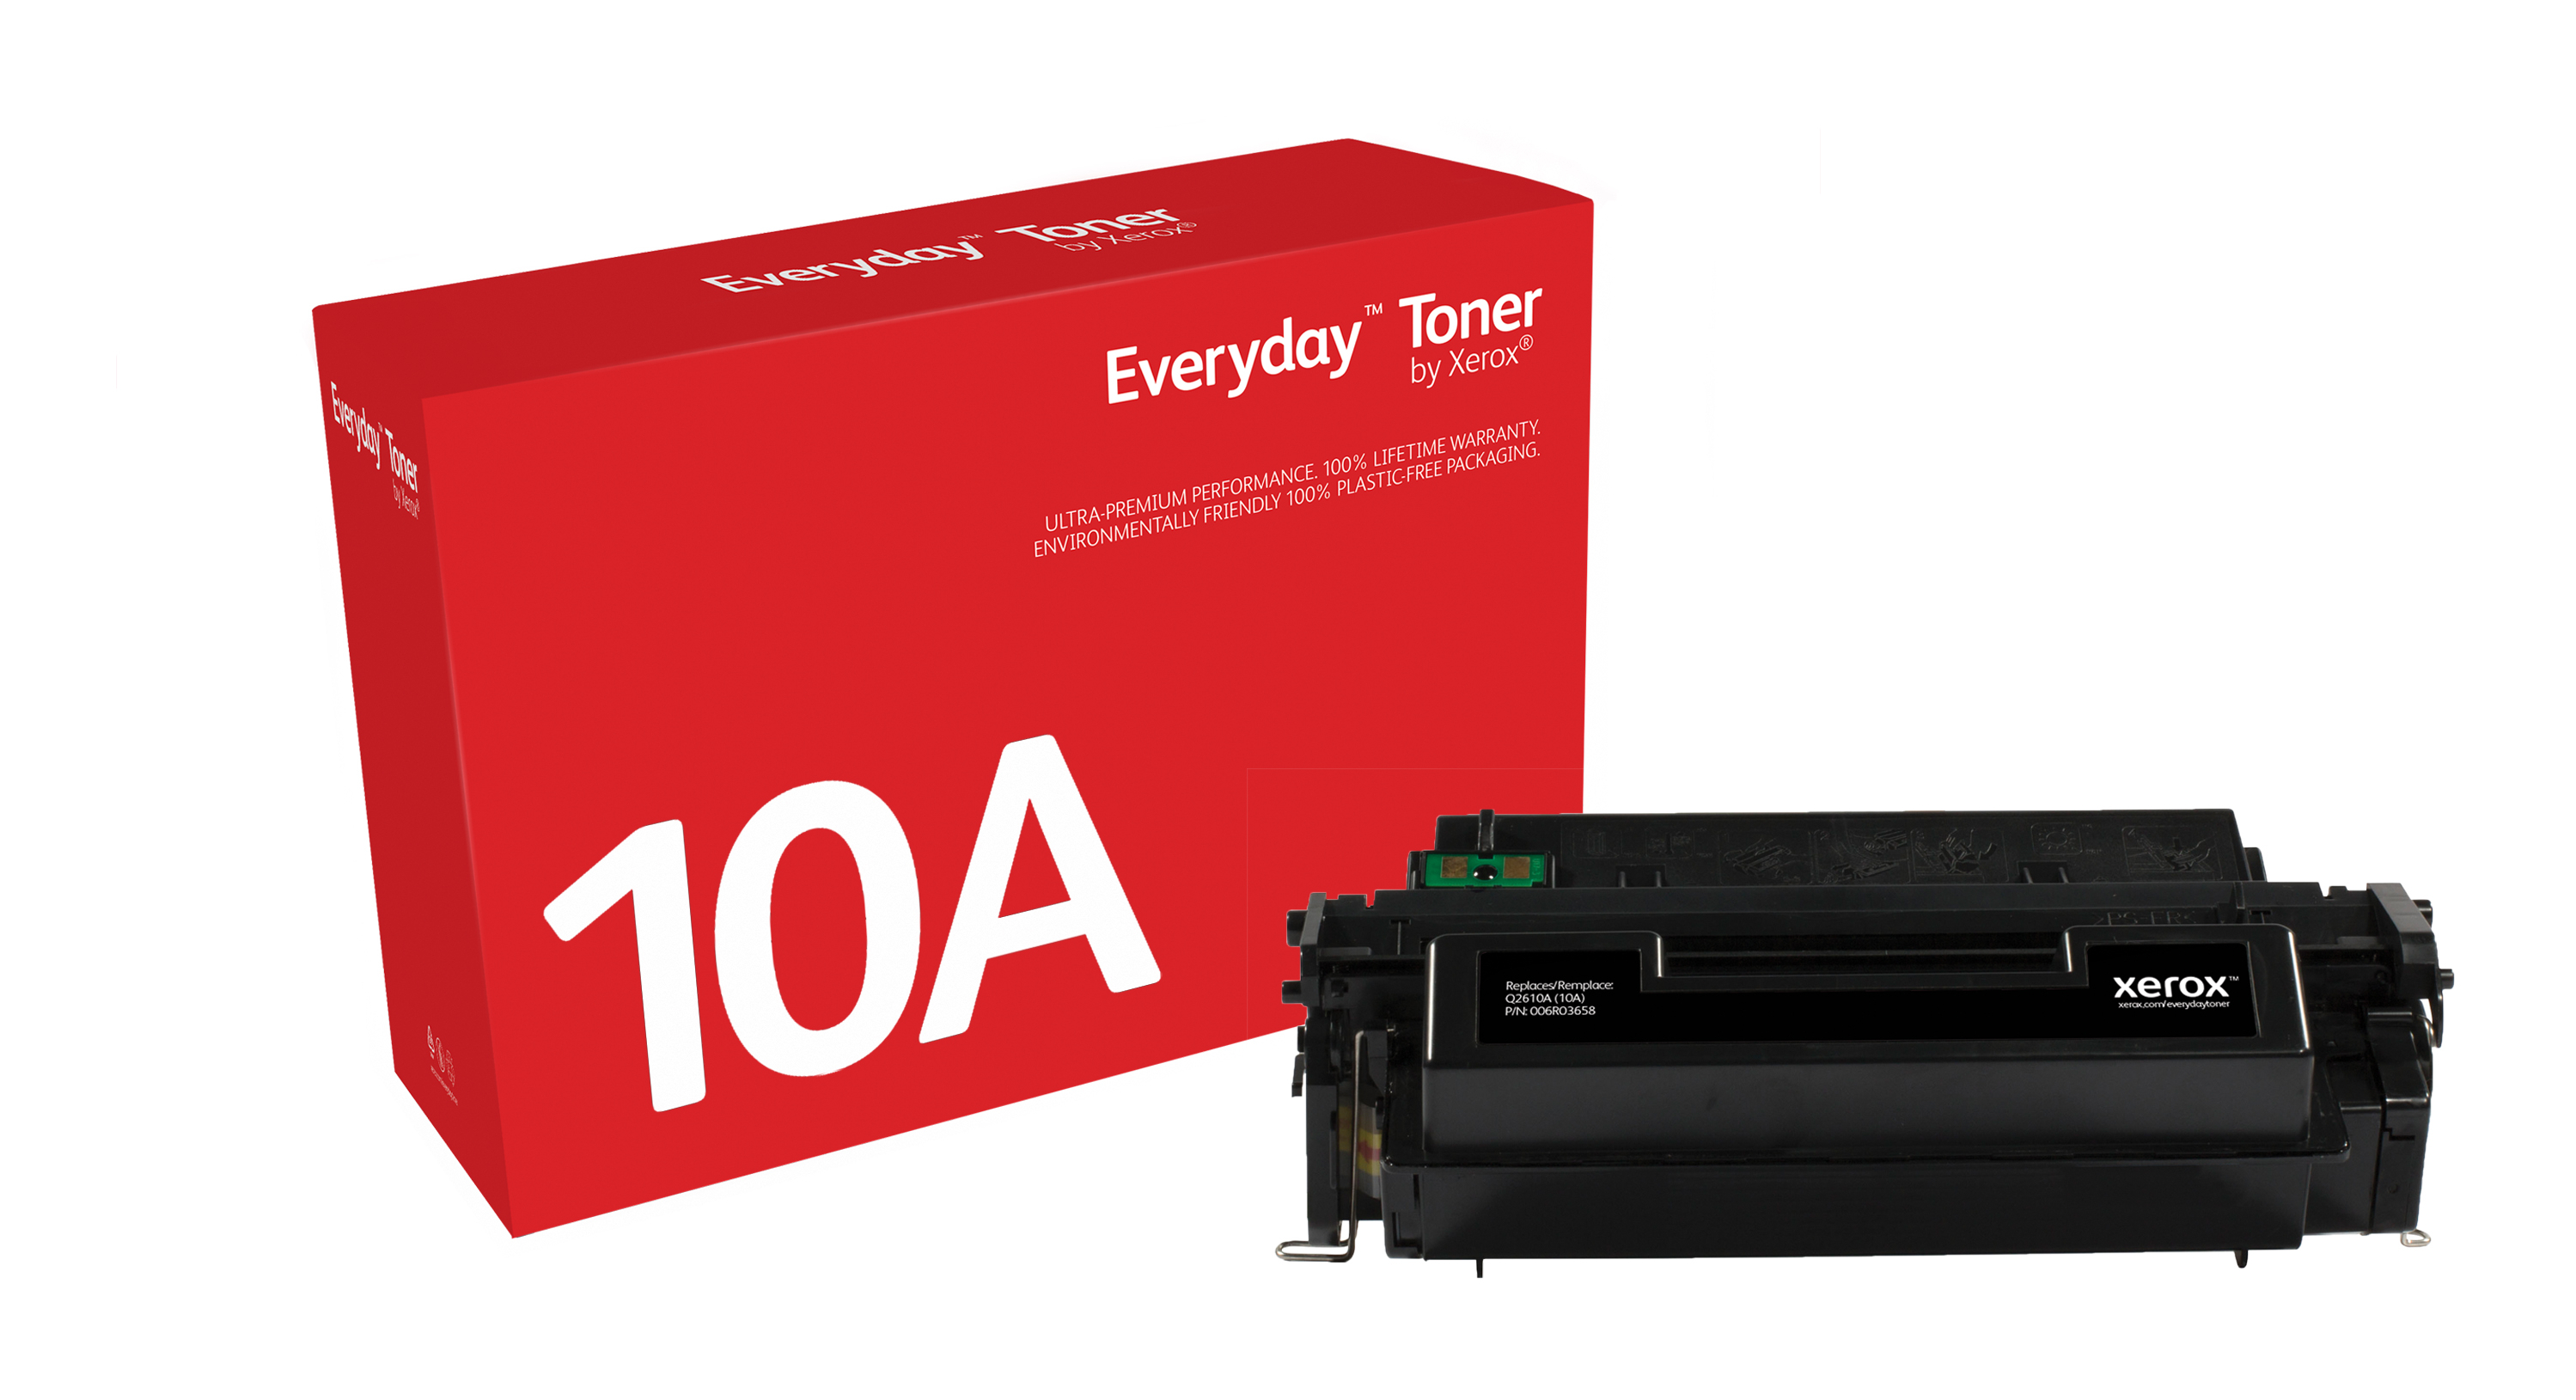 Toner Everyday Noir compatible avec HP 10A (Q2610A) 006R03658 by Xerox